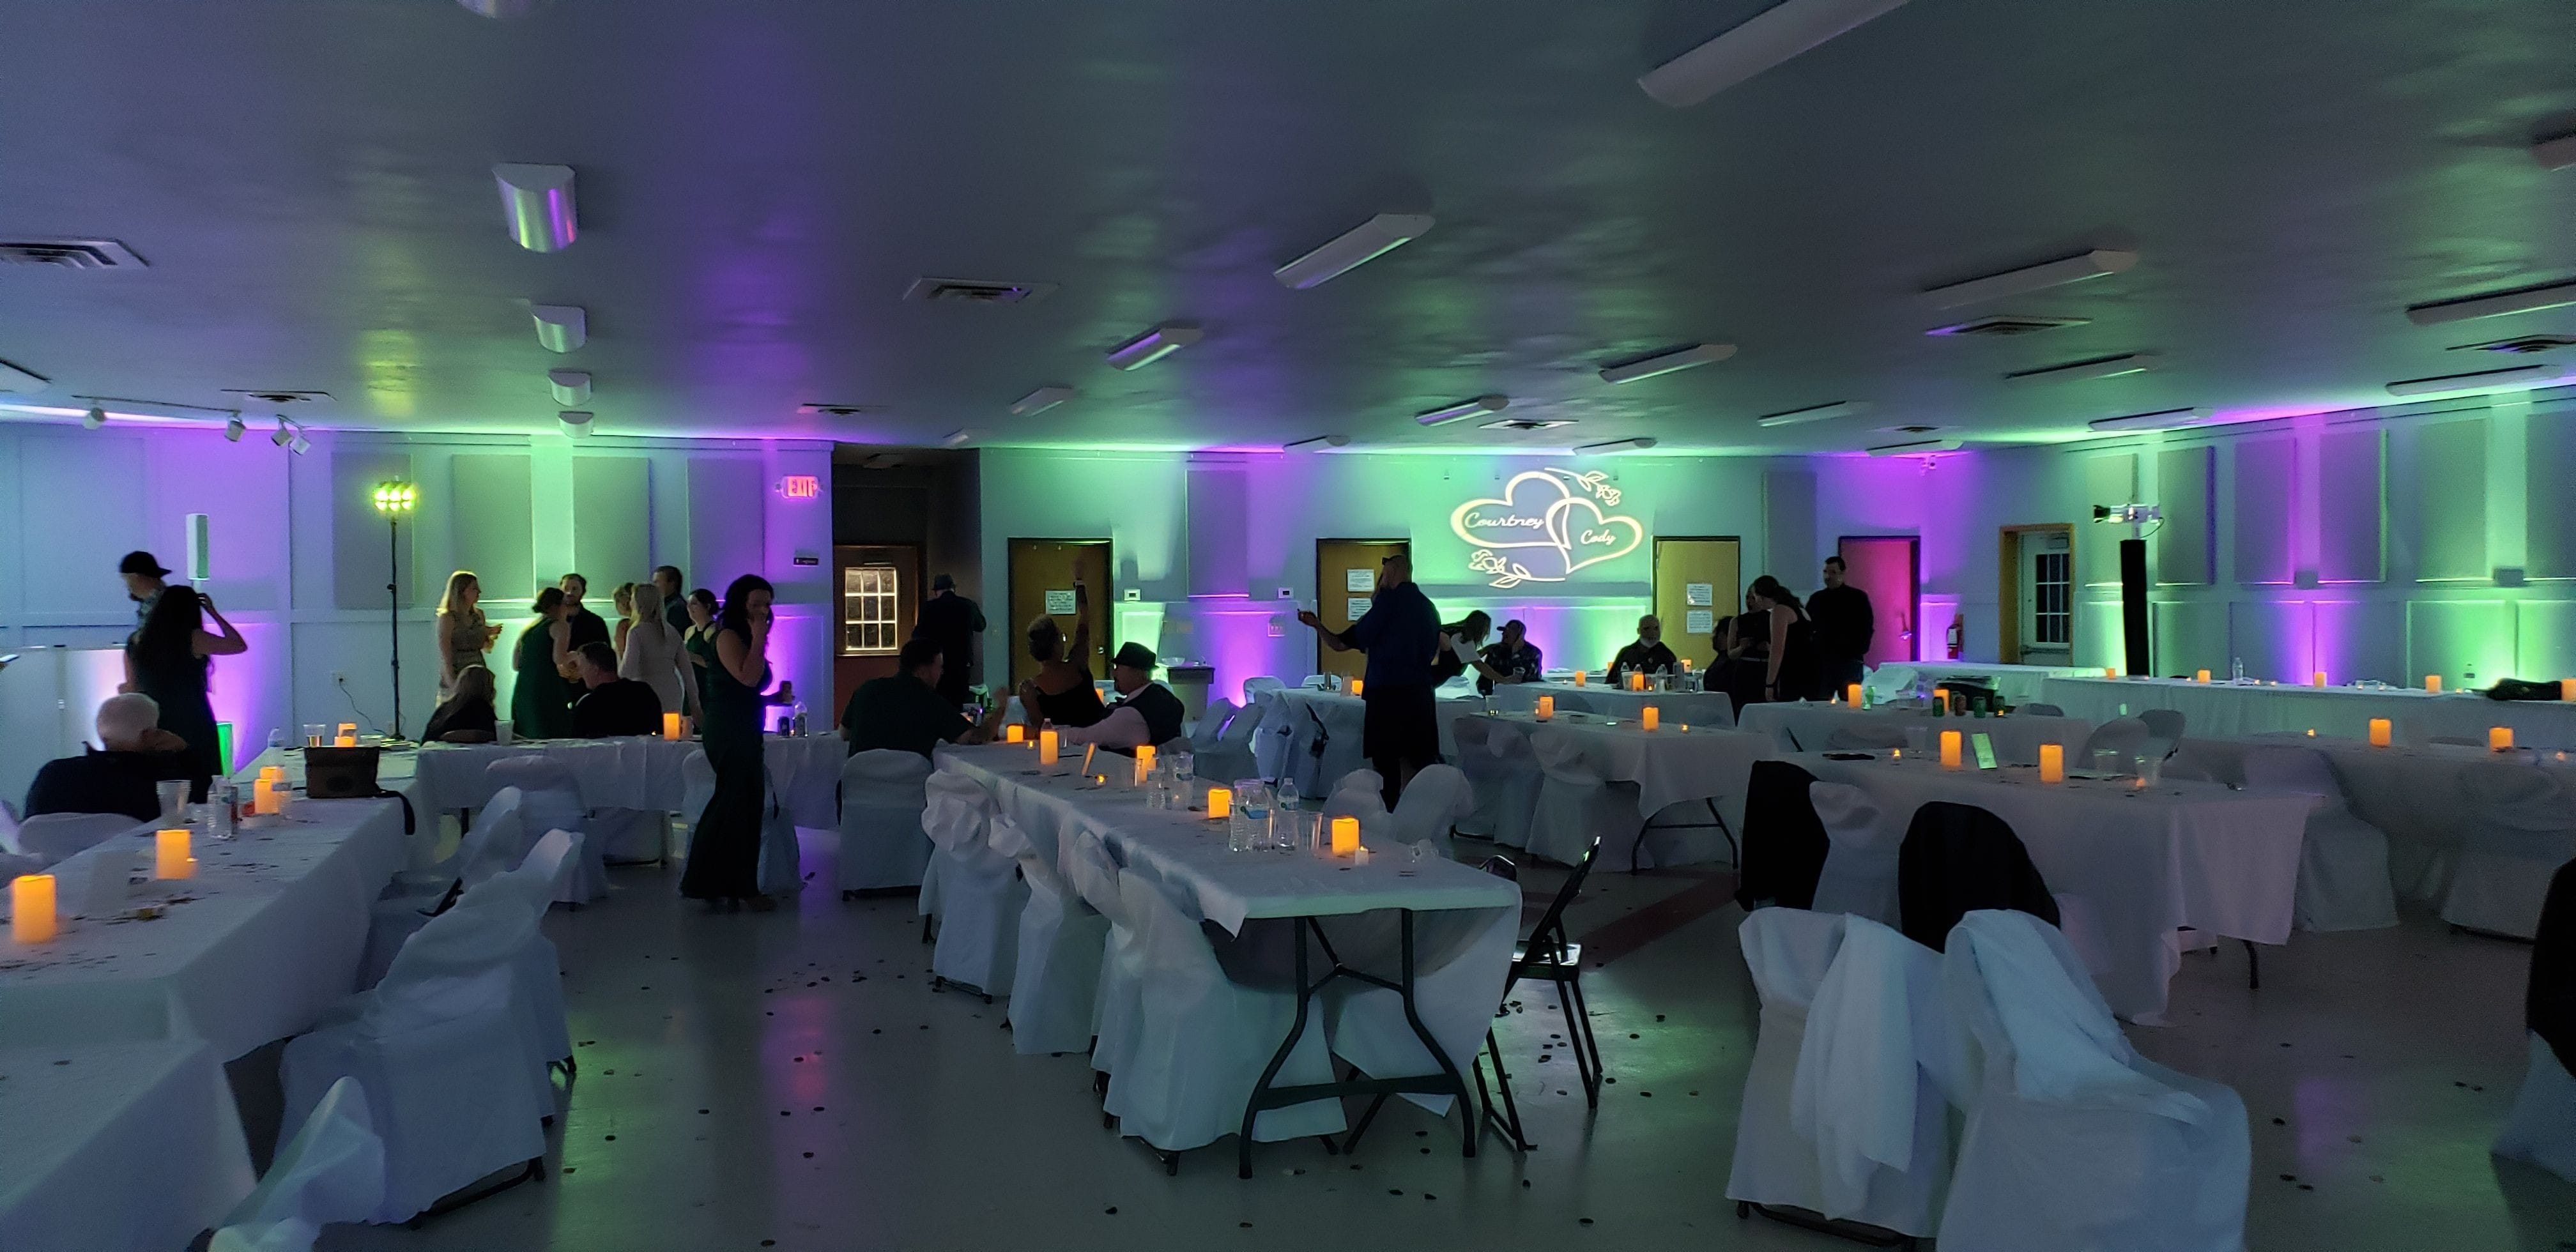 Wedding lighting by Duluth Event Lighting. Up lighting in purple and mint green at the Billings Park Community Center.